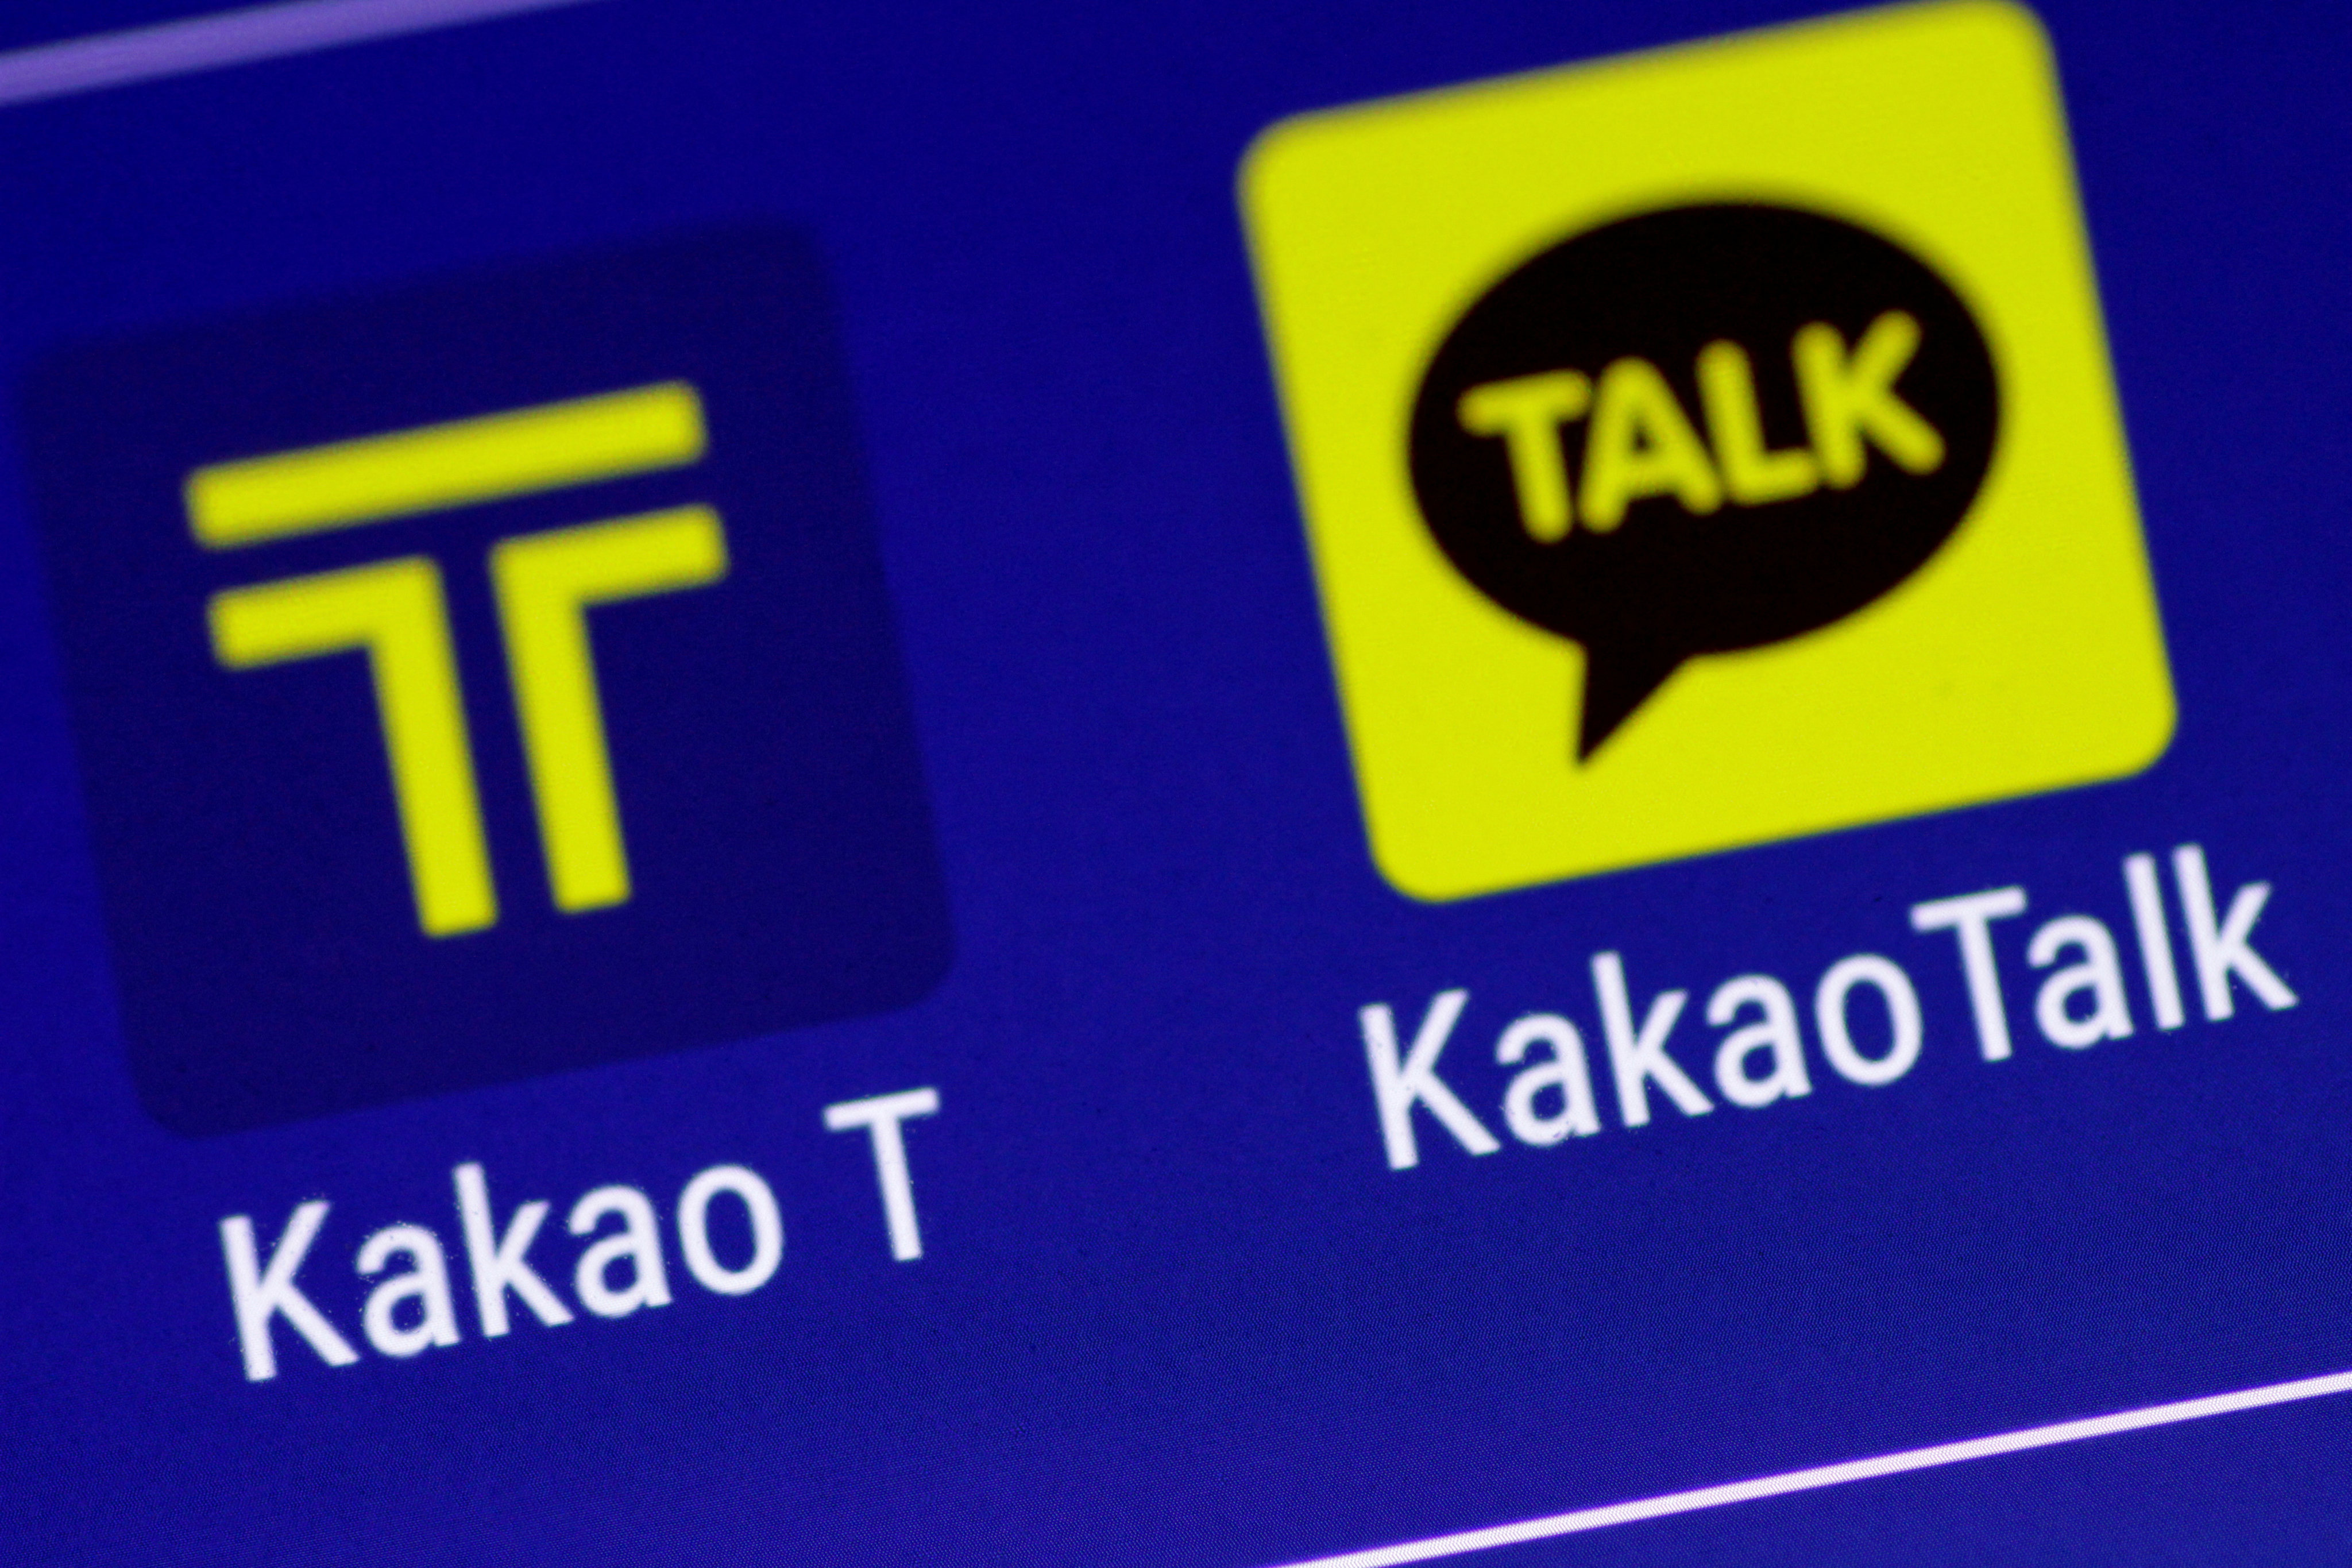 The blaze at SK C&C in southern Seoul on Saturday caused an hours-long breakdown across nearly all online services provided by Kakao Corp, including messenger app KakaoTalk, and other services such as ride-hailing, payment and gaming. Photo: Reuters